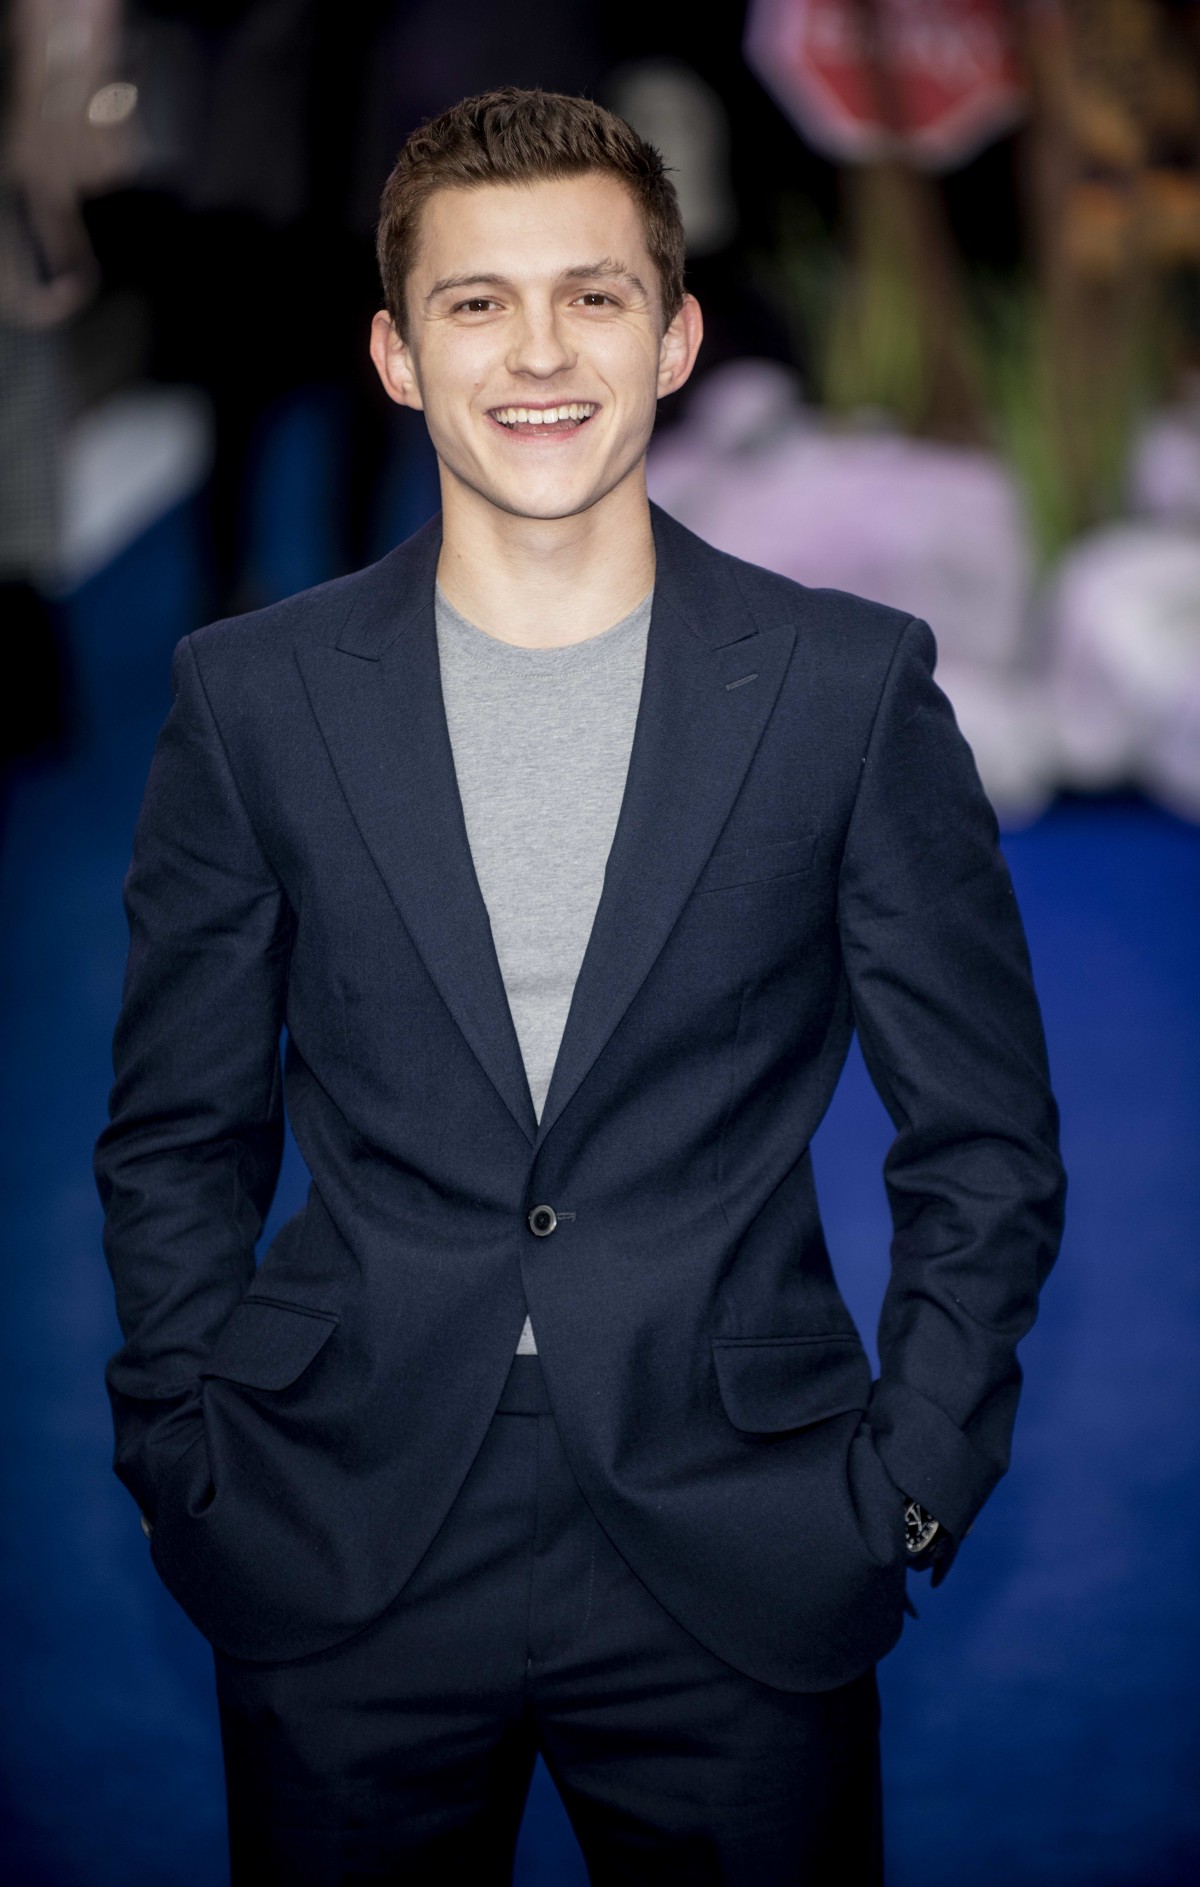 Tom Holland at the 'Onward' film premiere, Curzon Mayfair, London, UK - 23 Feb 2020 photo by Brian...